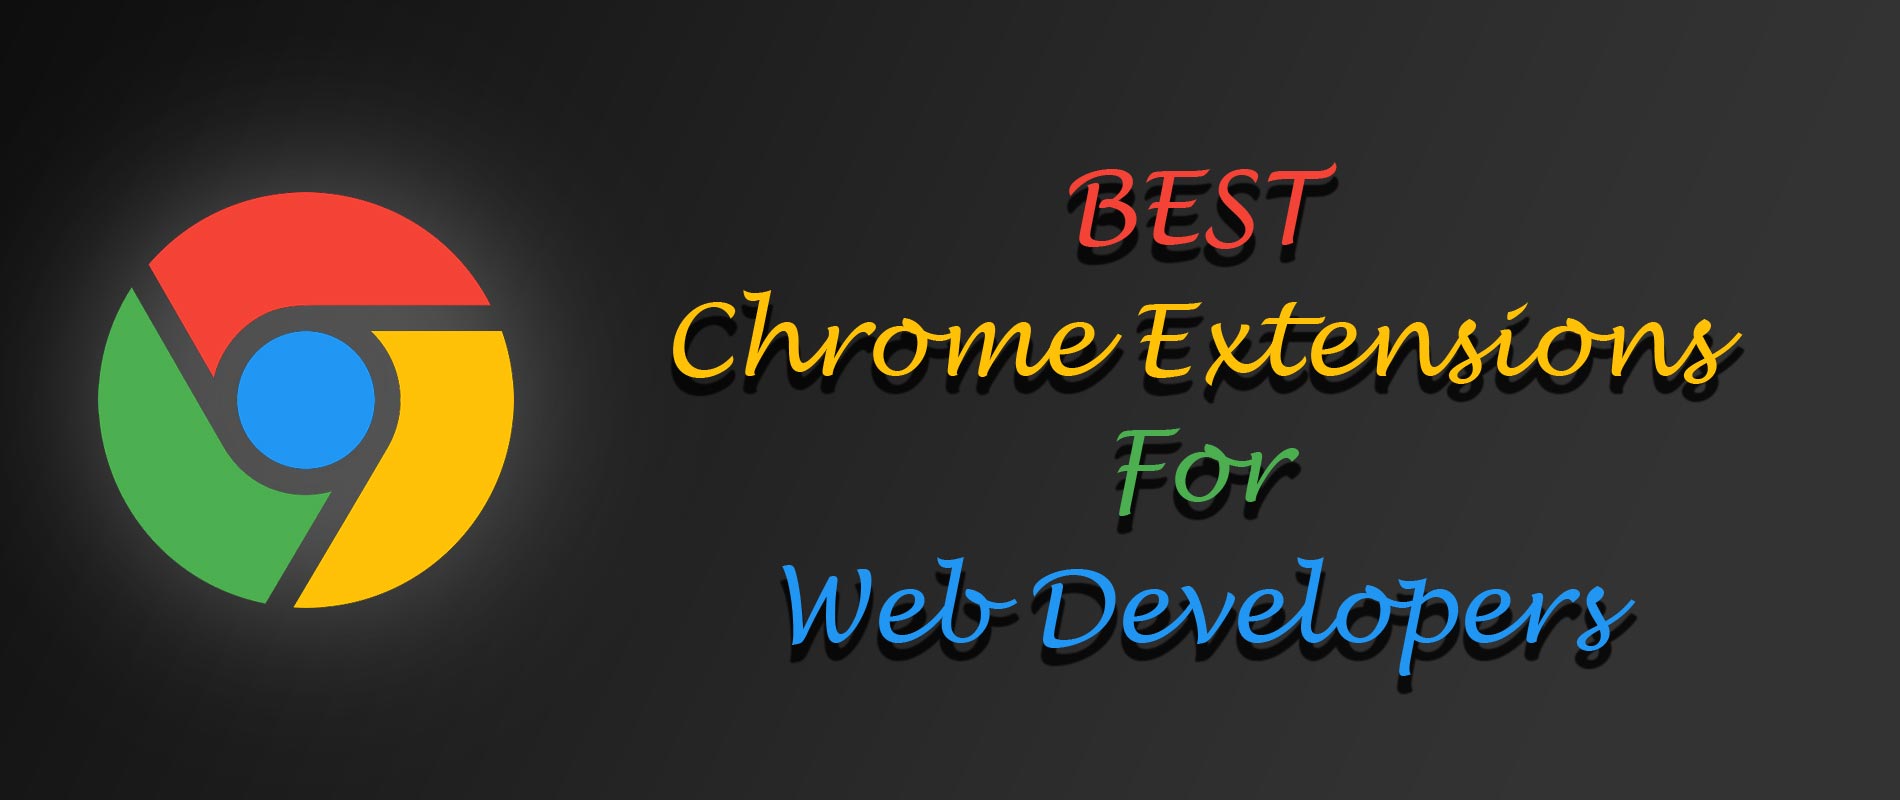 15 Best Chrome Extensions For Web Developers Codes And Design